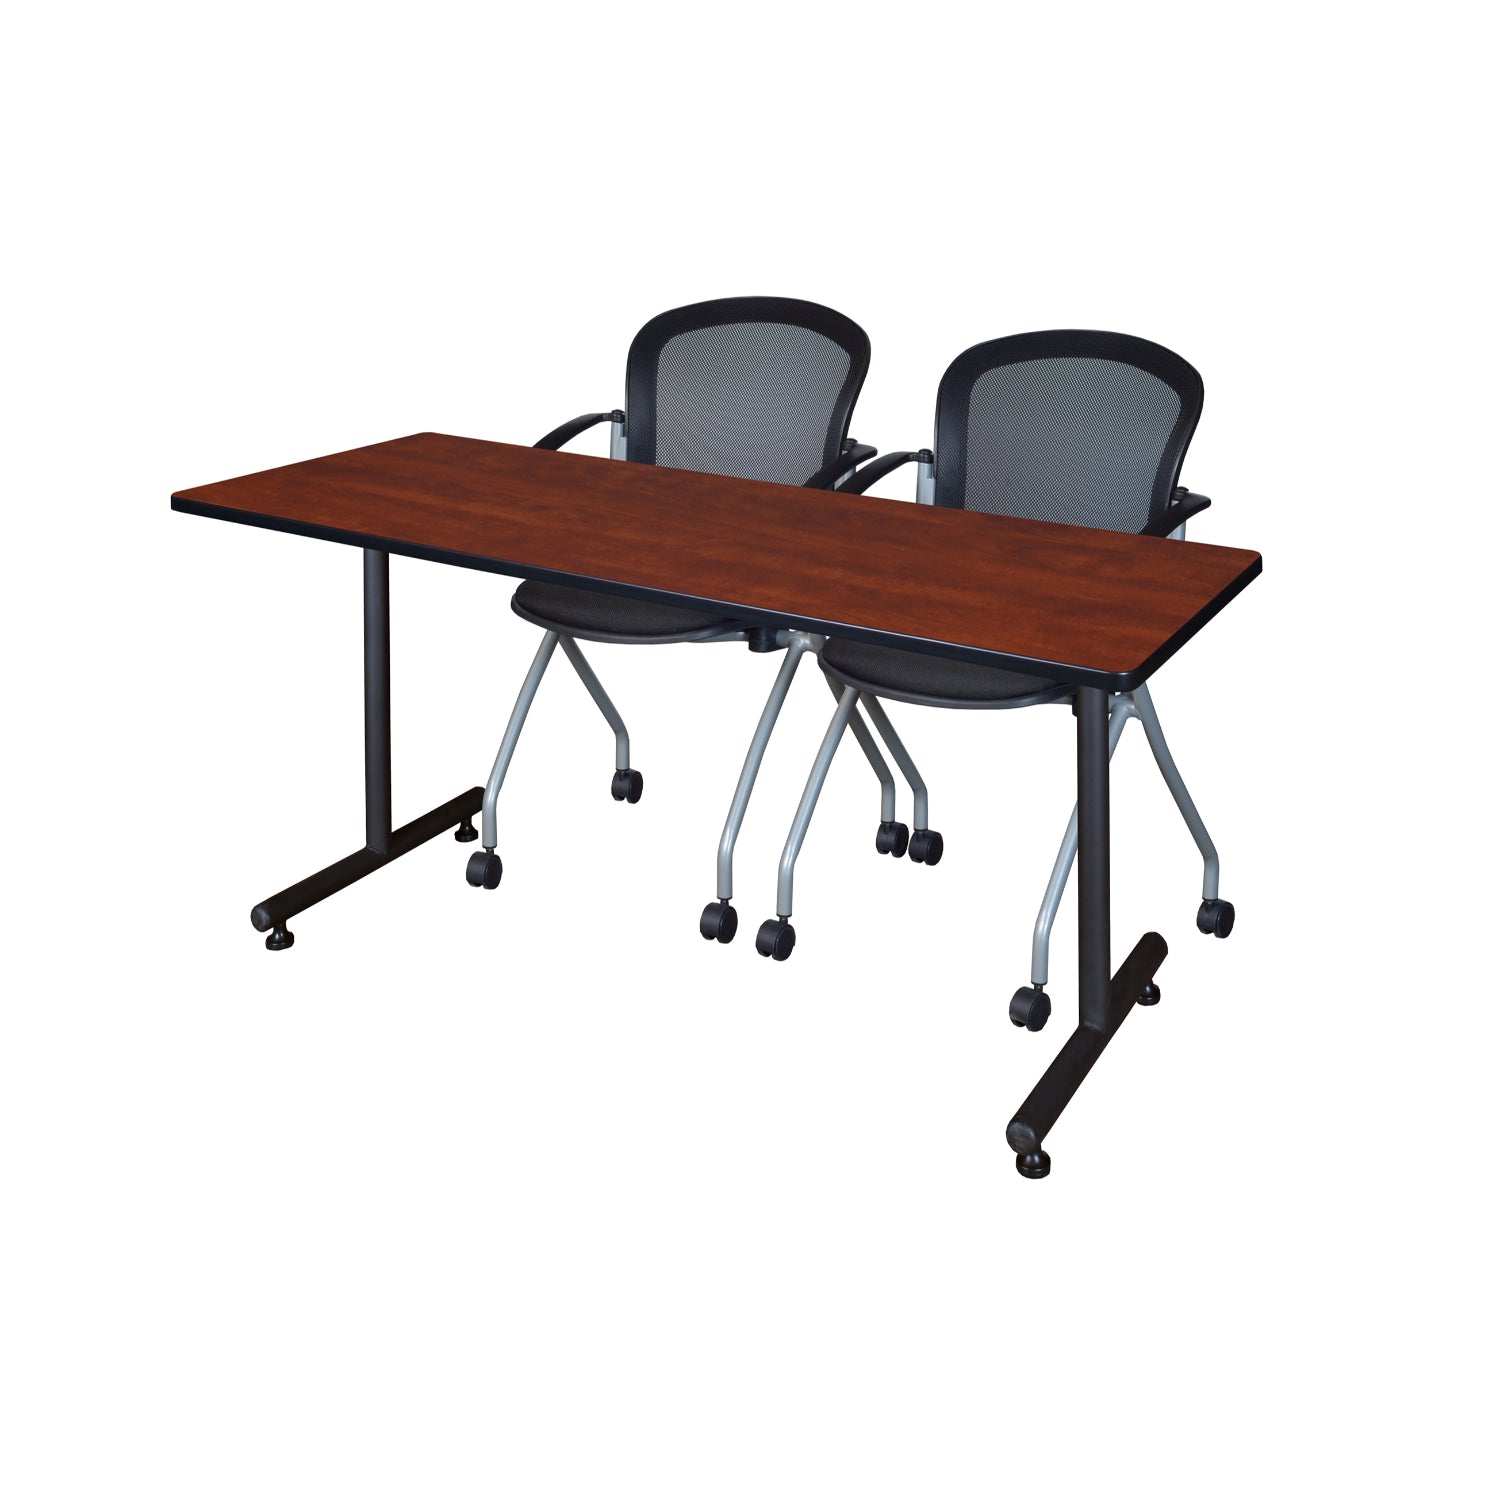 Kobe Training Table and Chair Package, Kobe 72" x 30" T-Base Training/Seminar Table with 2 Cadence Nesting Chairs